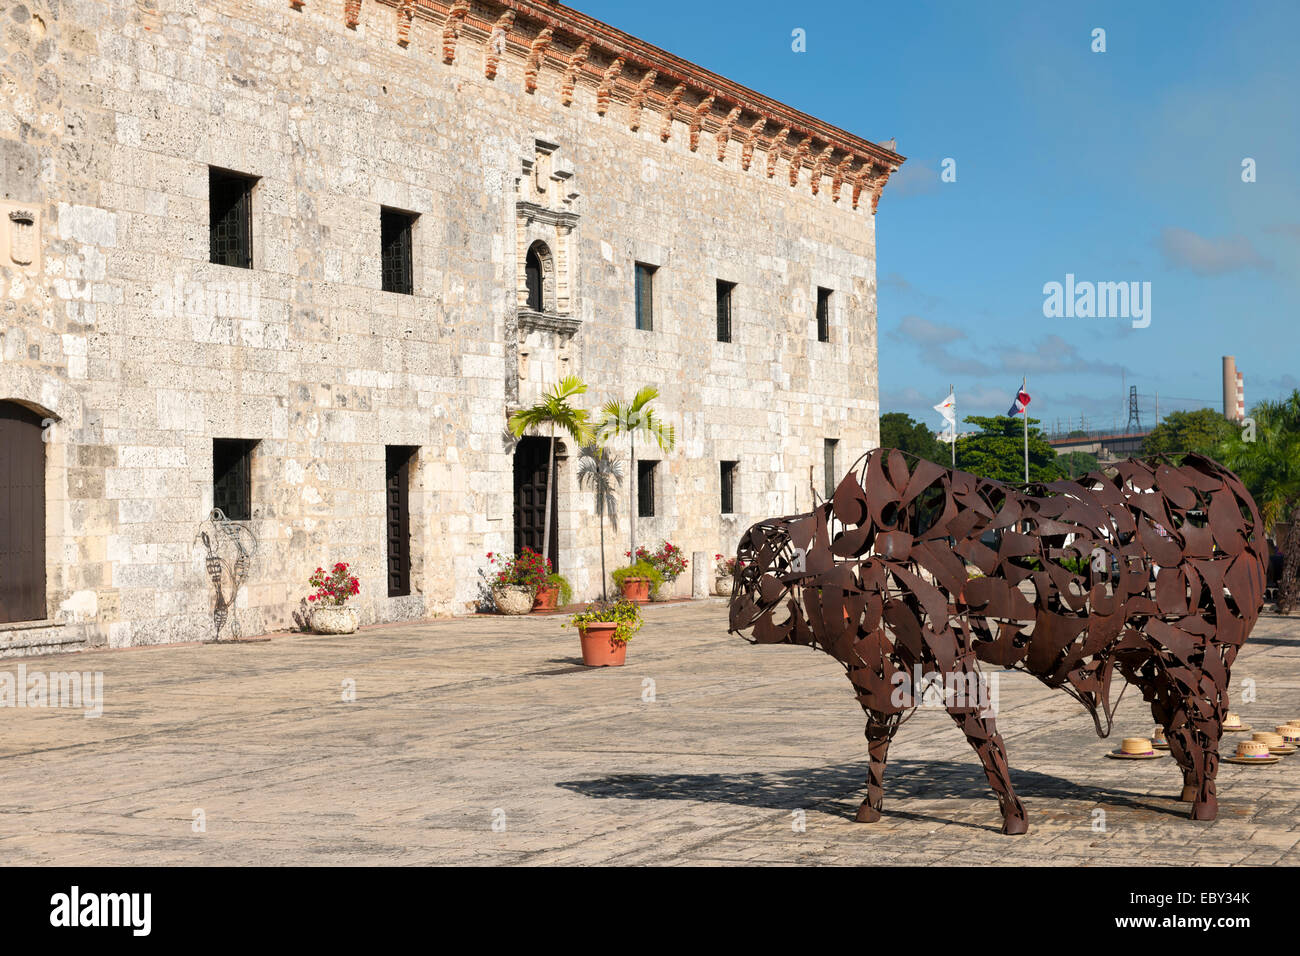 images - Tierfigur photography Alamy stock and hi-res